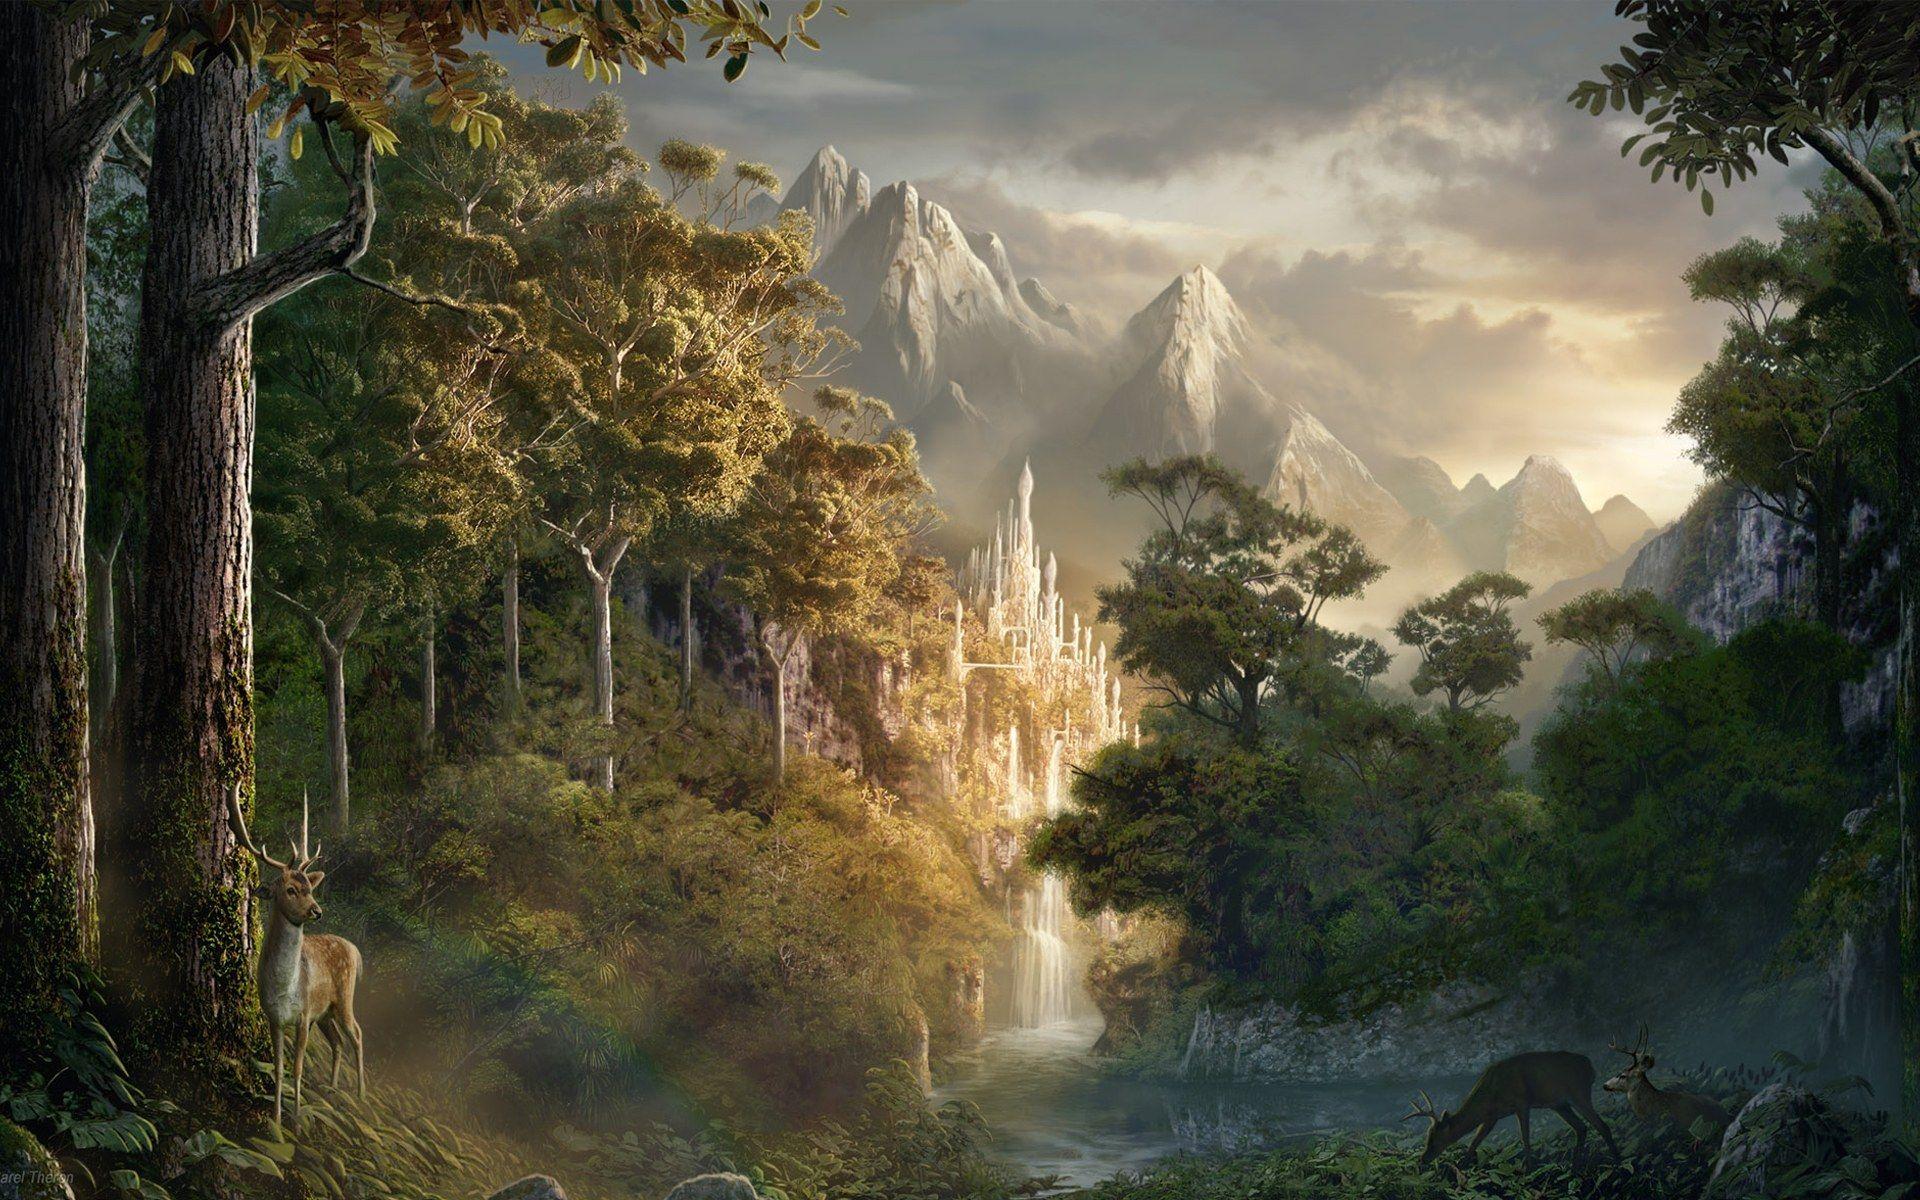 Numenor Wallpapers Top Free Numenor Backgrounds Wallpaperaccess